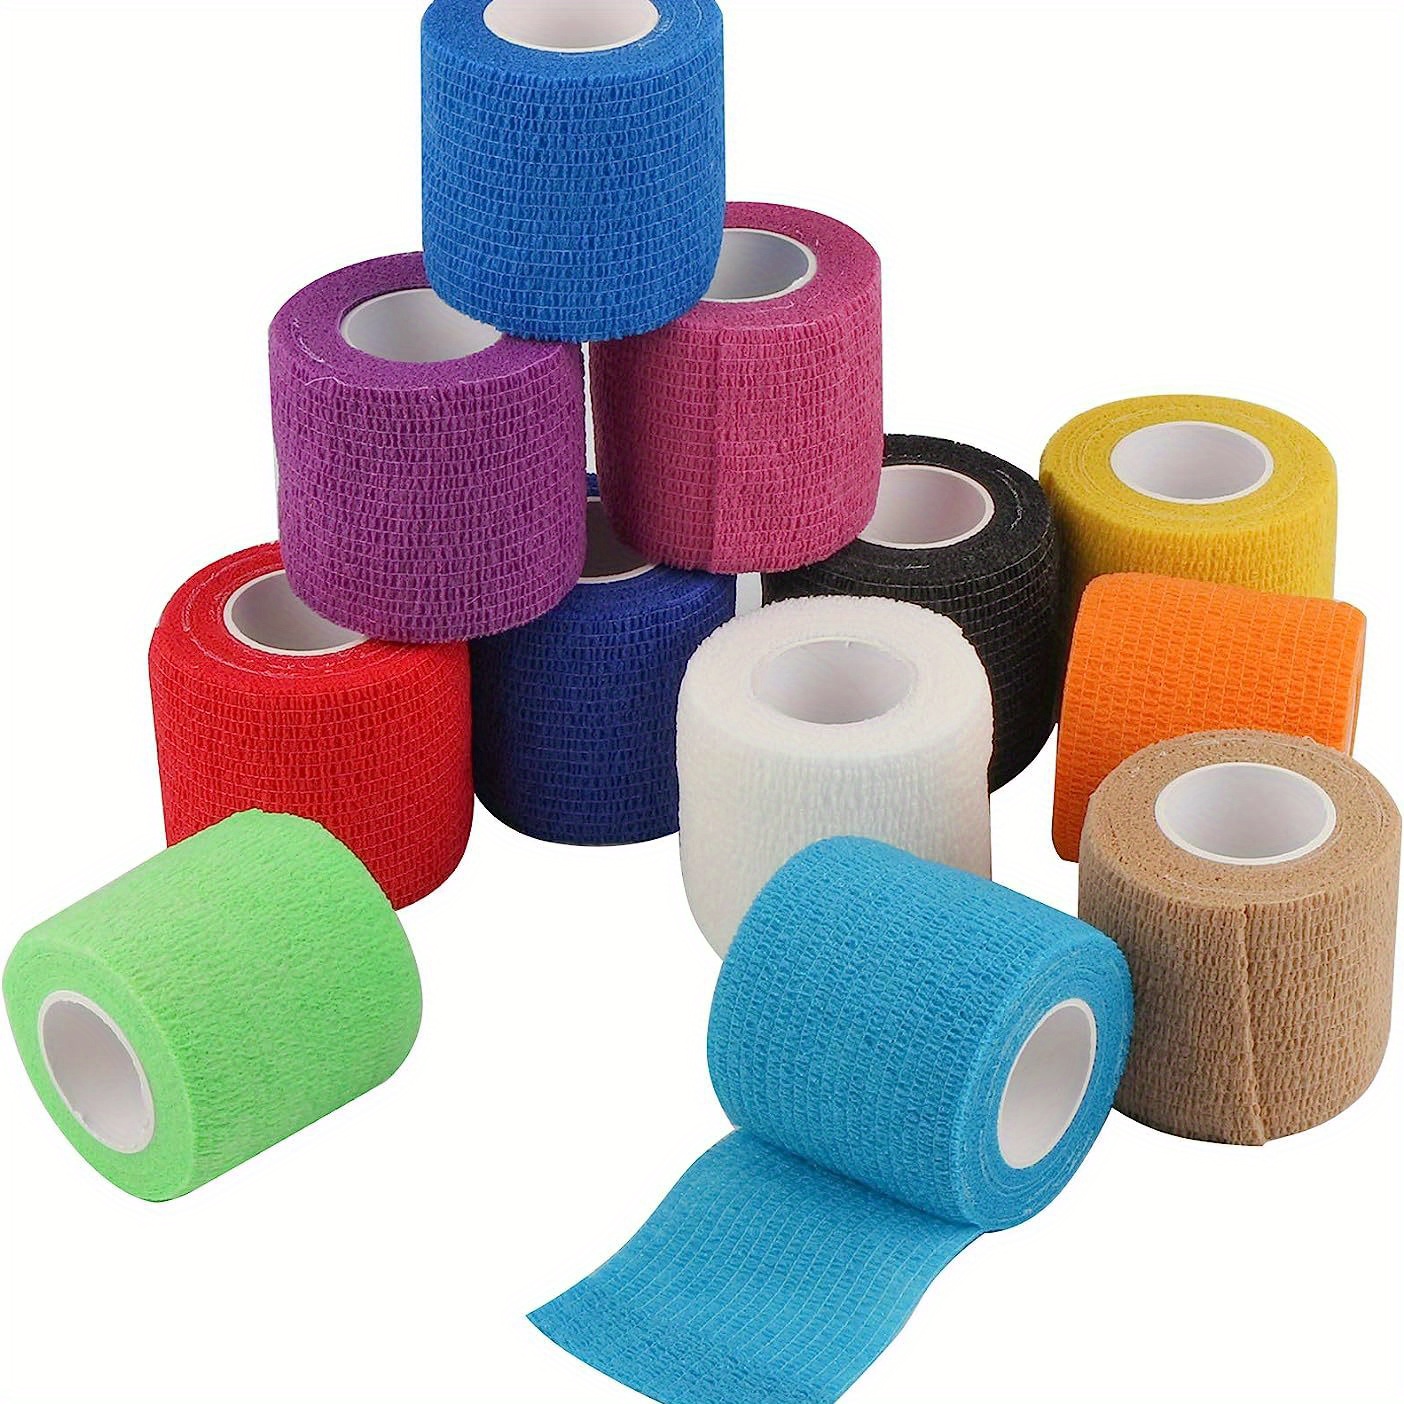 First Aid Elastic Tape 1 x 5 YD – BHP Safety Products